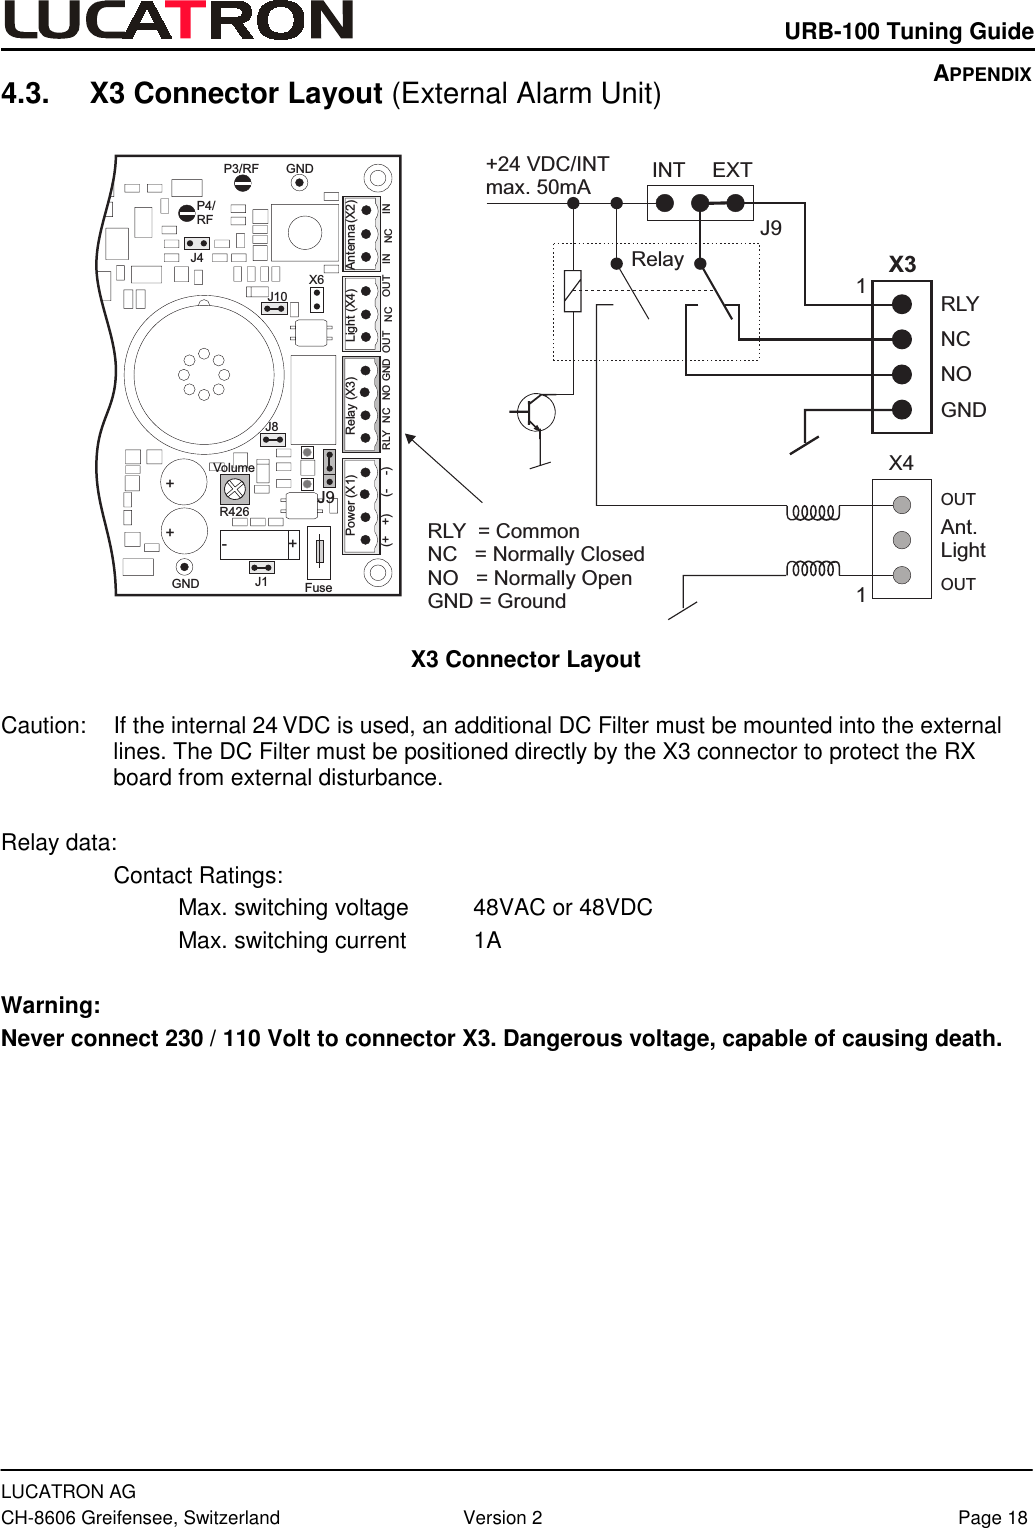    URB-100 Tuning Guide  LUCATRON AG CH-8606 Greifensee, Switzerland  Version 2  Page 18 4.3.  X3 Connector Layout (External Alarm Unit)  RLY = CommonNC = Normally ClosedNO = Normally OpenGND = Ground++-+GNDP3/RFP4/RFGNDR426J10J4J9J8J1IN NC INOUT NC OUTPower (X1) Relay (X3) Light (X4) Antenna(X2)X6Fuse(+ +) (- -)VolumeRLY NC NO GNDEXTINTRelay+24 VDC/INTmax. 50mA1RLYNCNOGNDX3J91OUTOUTX4Ant.Light   X3 Connector Layout   Caution:  If the internal 24 VDC is used, an additional DC Filter must be mounted into the external lines. The DC Filter must be positioned directly by the X3 connector to protect the RX board from external disturbance.  Relay data:   Contact Ratings:       Max. switching voltage   48VAC or 48VDC     Max. switching current  1A  Warning:  Never connect 230 / 110 Volt to connector X3. Dangerous voltage, capable of causing death.  APPENDIX 